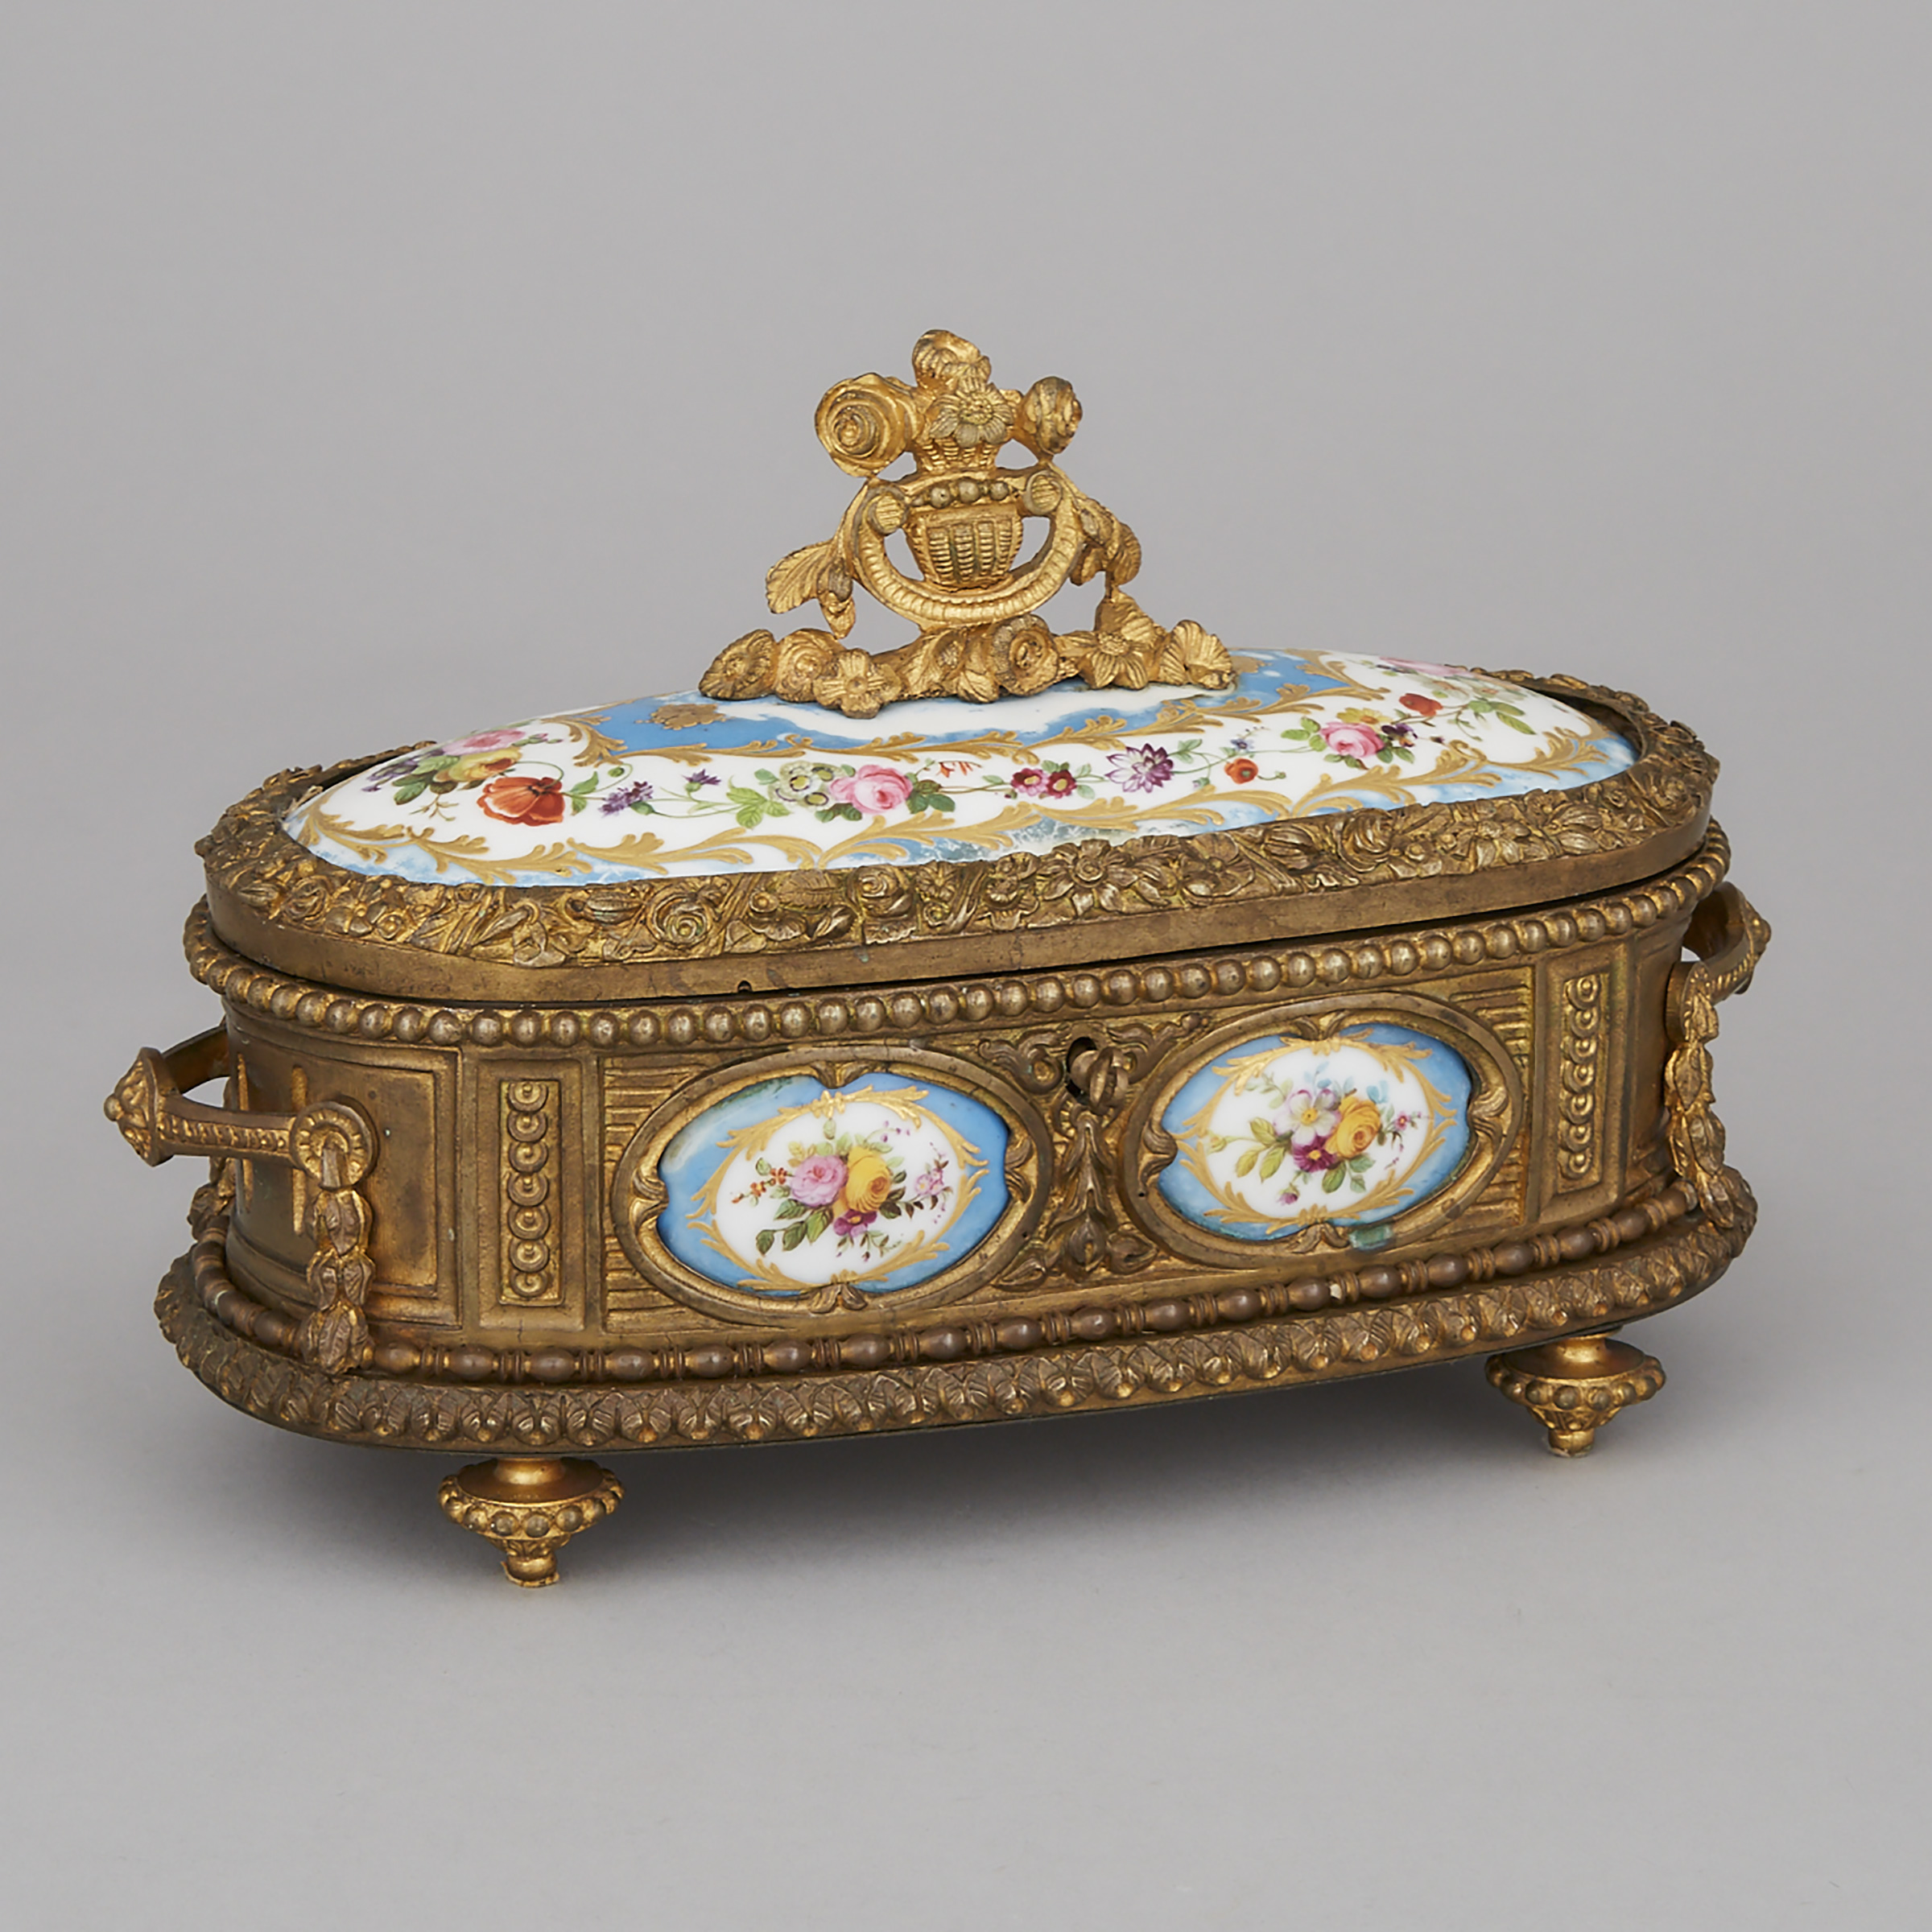 French 'Sèvres' Porcelain Mounted Gilt Bronze Oval Casket, late 19th century